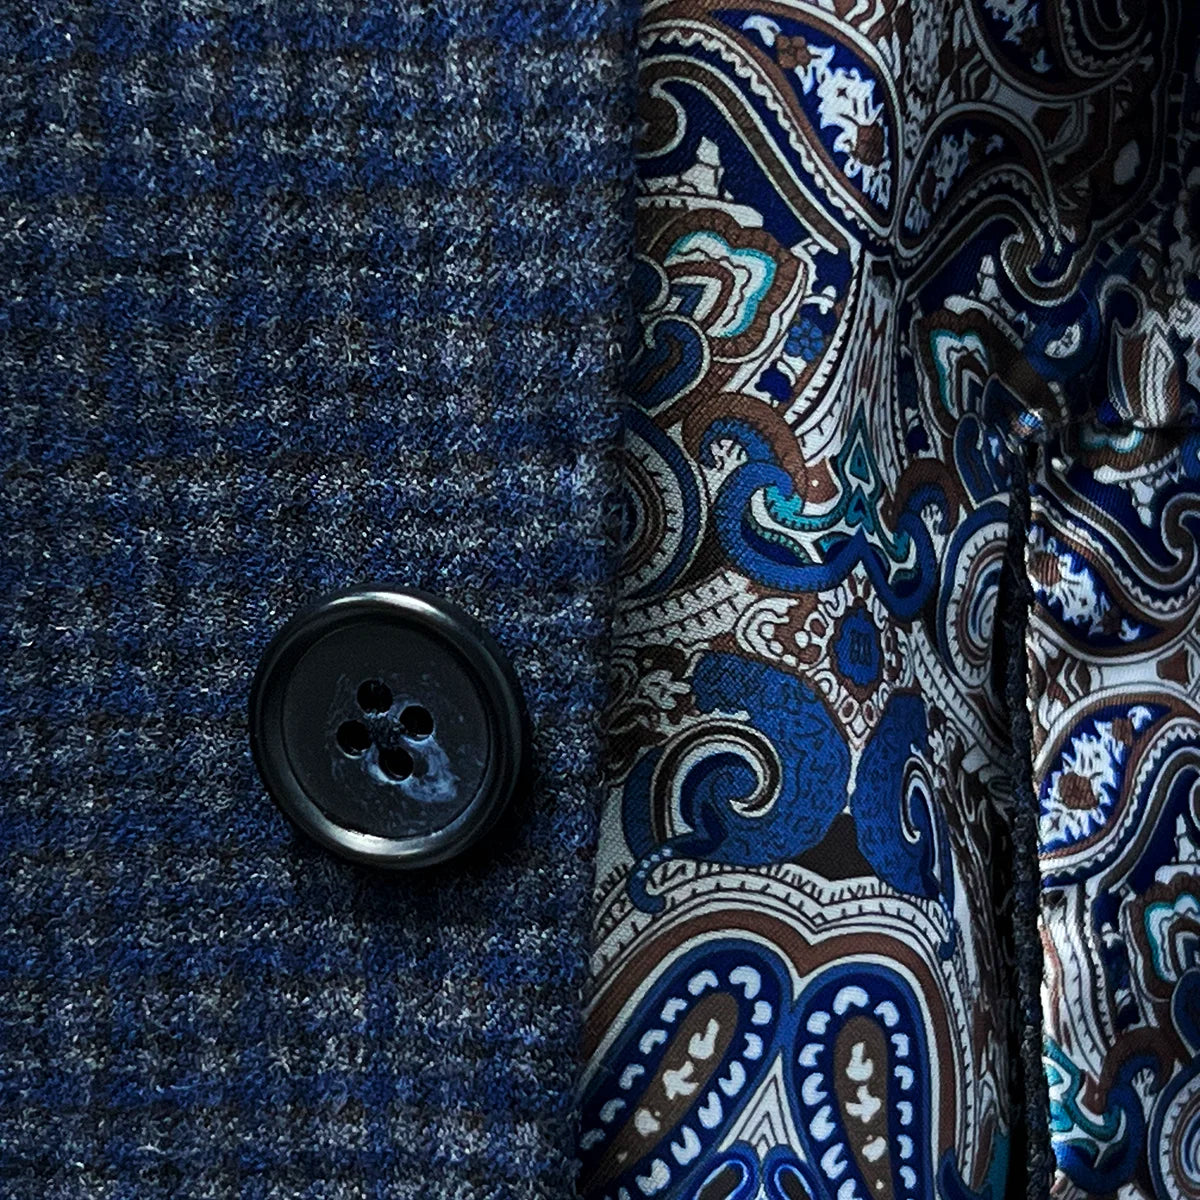 Horn marble buttons adding a classic touch to a gray blue mini grid checks sport coat made of flannel wool.